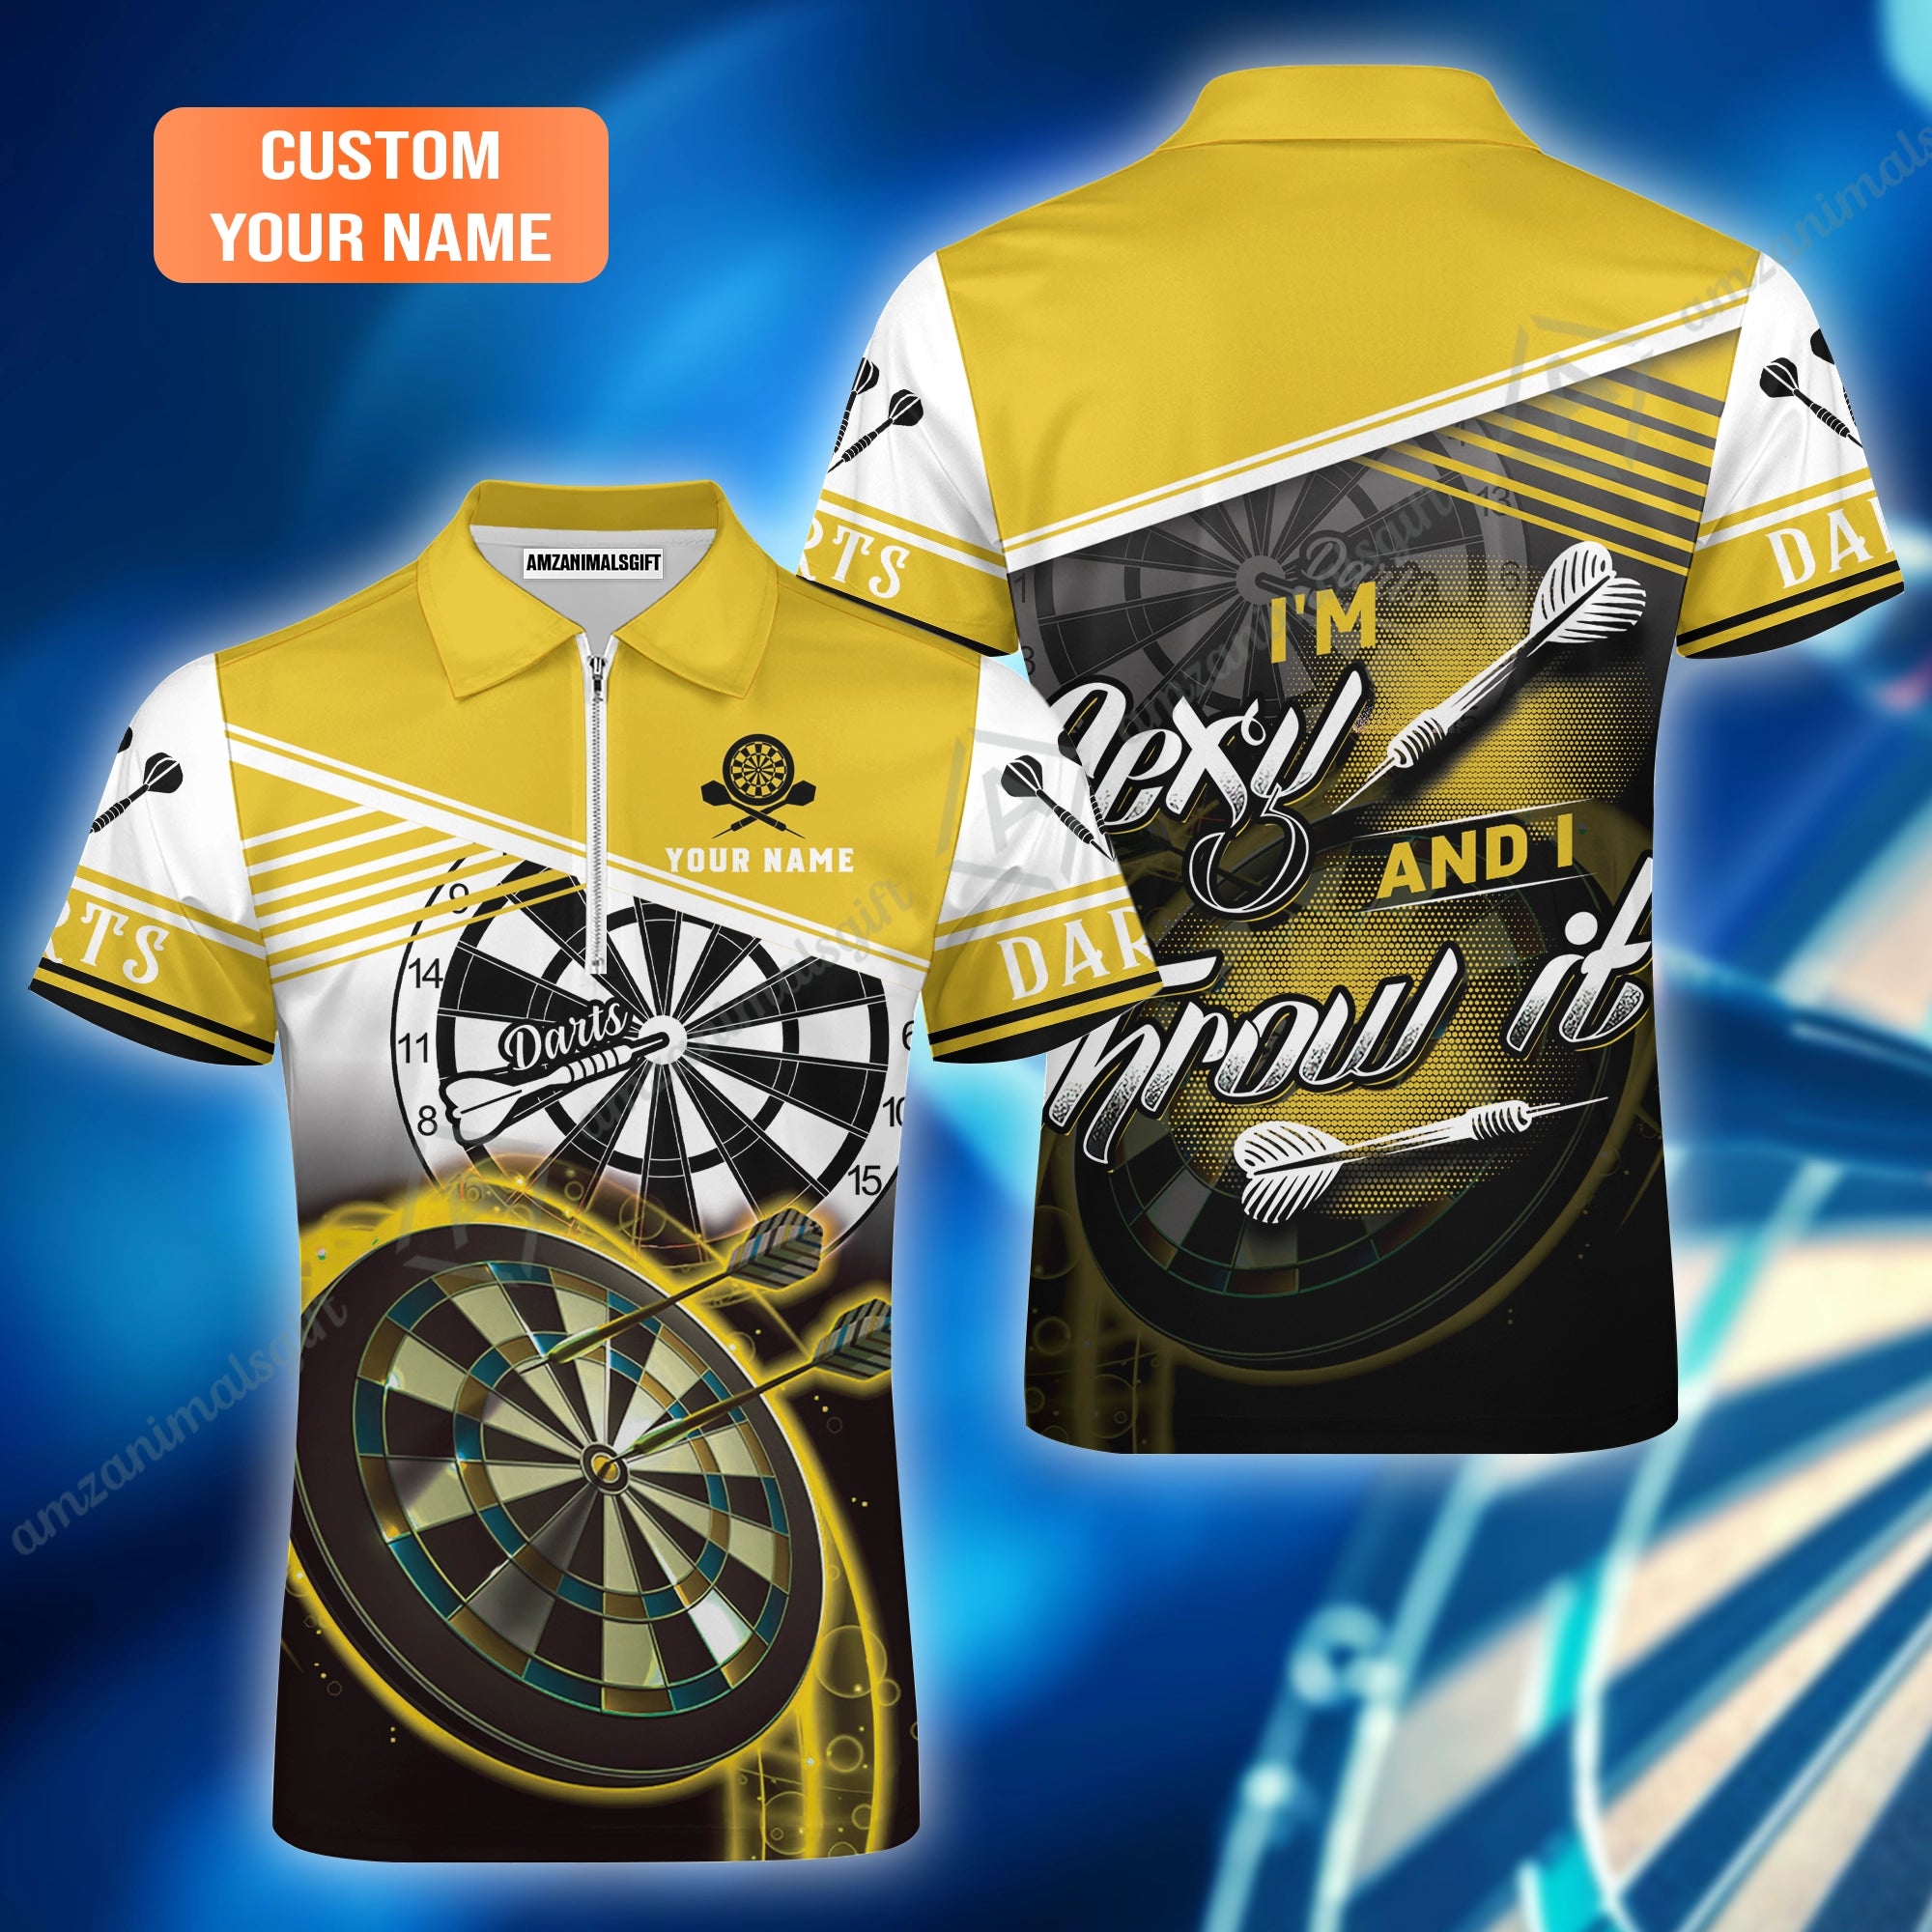 Personalized Darts Jersey, Darts Yellow Color Custom Quarter-Zip Polo Shirt I'm Sexy And I Throw It, Outfits For Darts Players, Darts Team